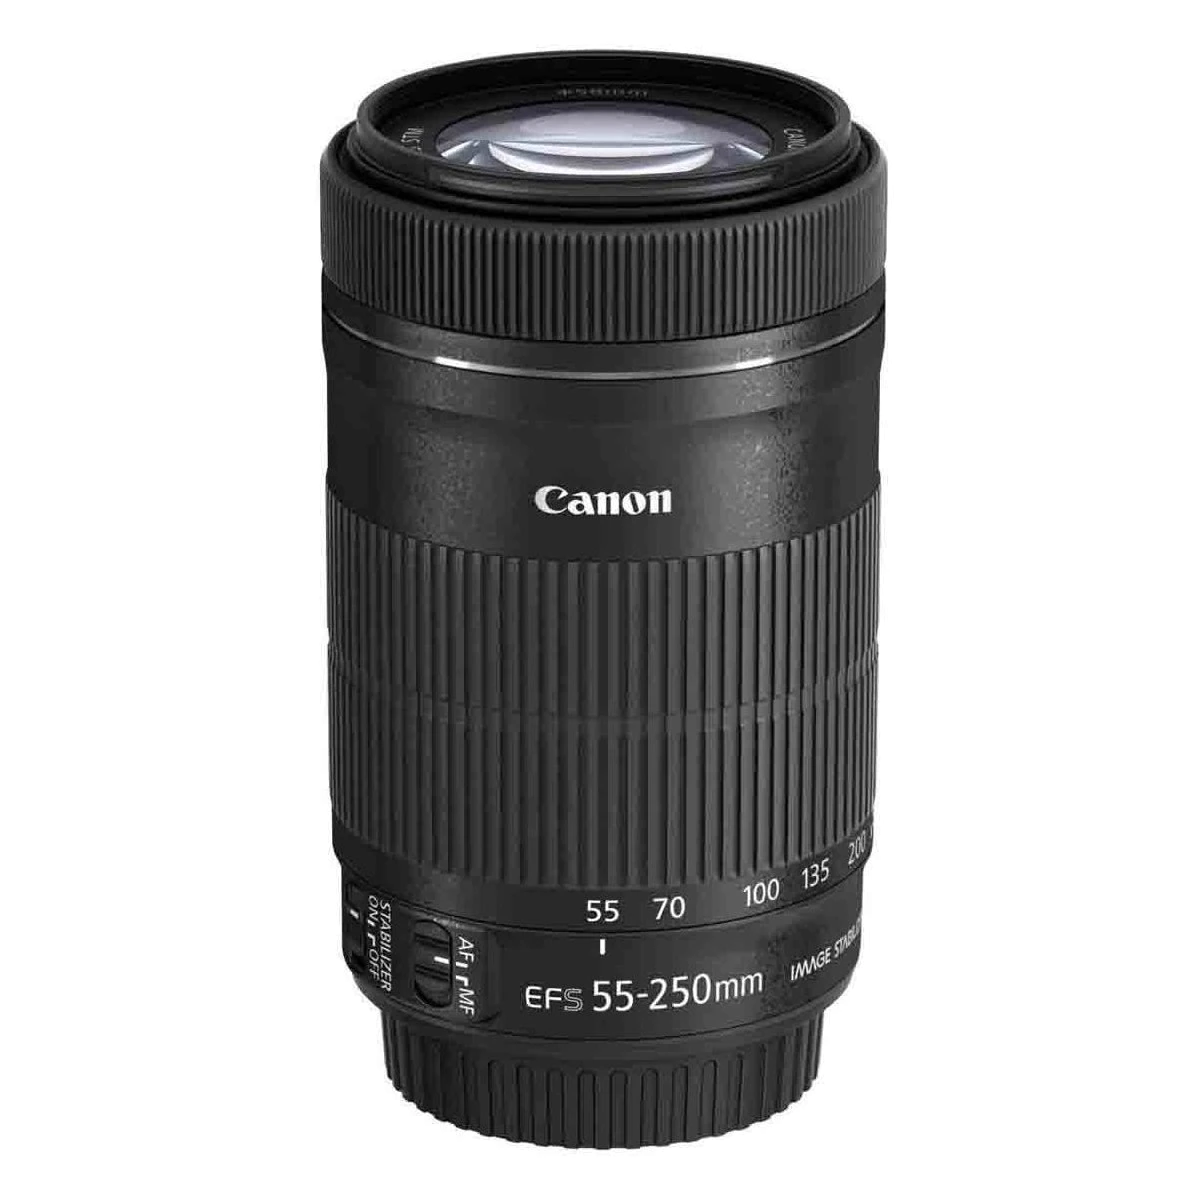 Objetivo Canon EF-S 55-250 mm F/4-5,6 IS STM para Canon EOS